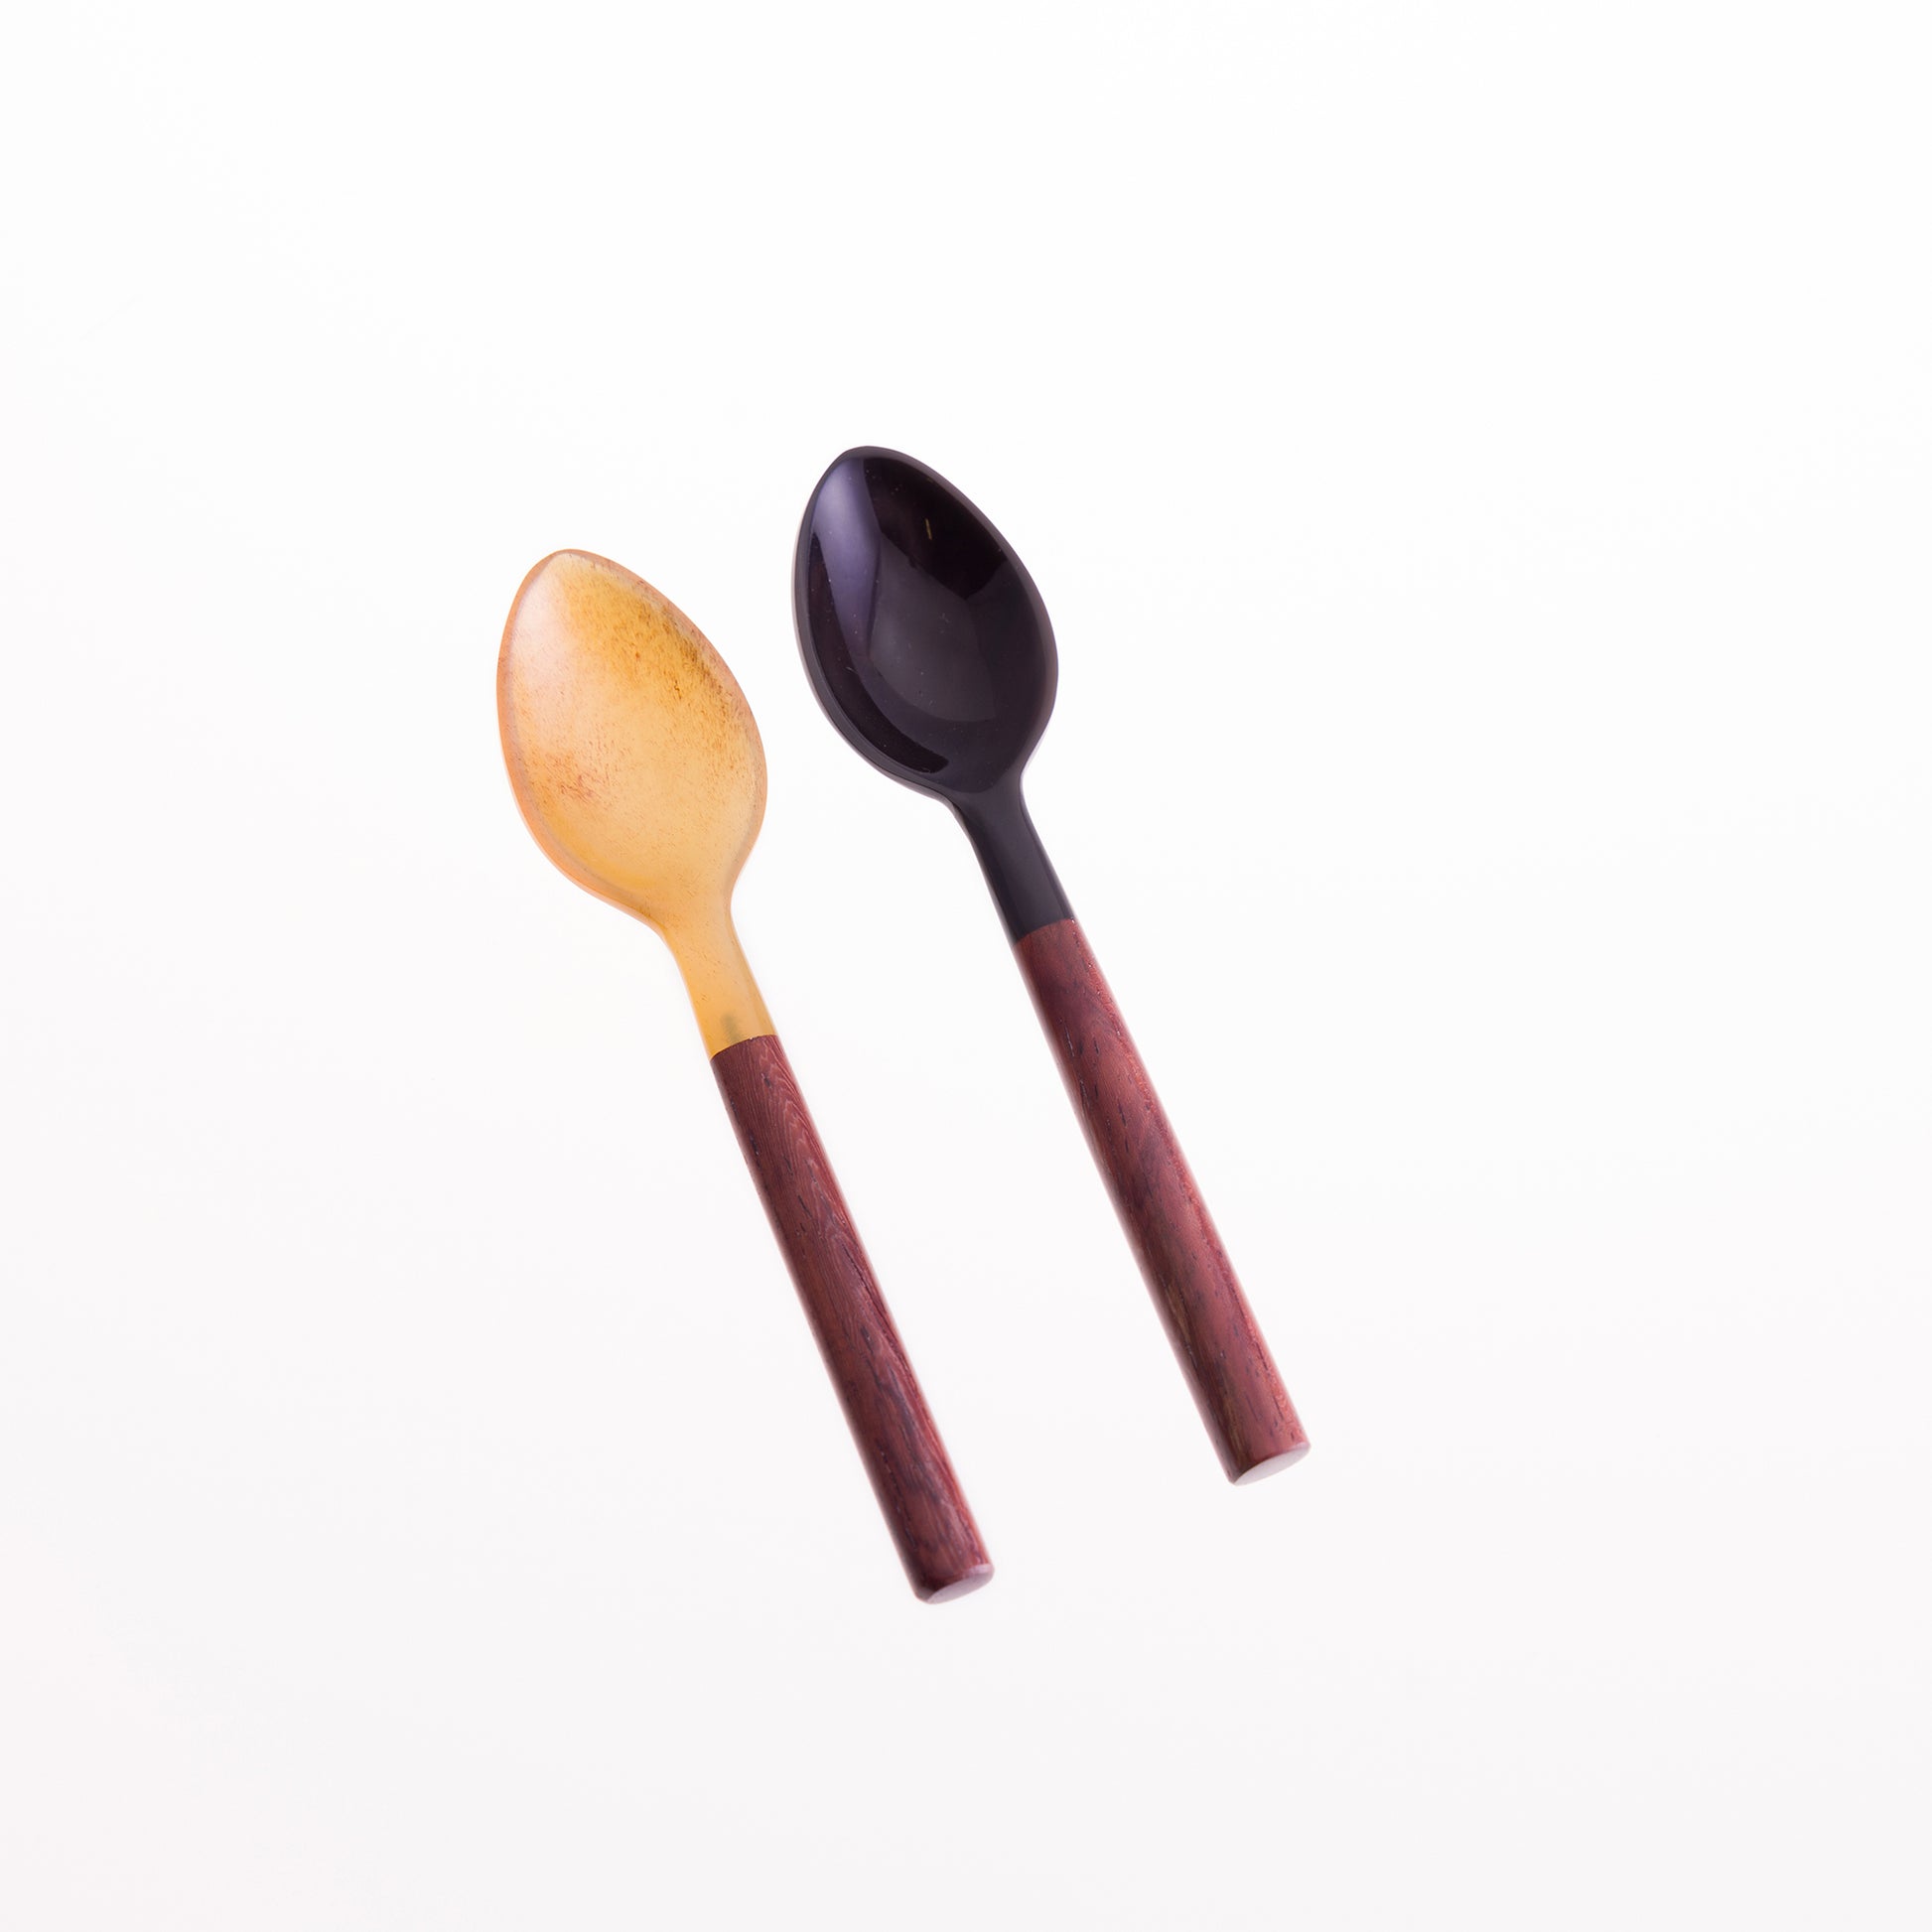 A pair of horn egg spoons. One is natural horn with a rosewood handle, the second is black horn with a rosewood handle